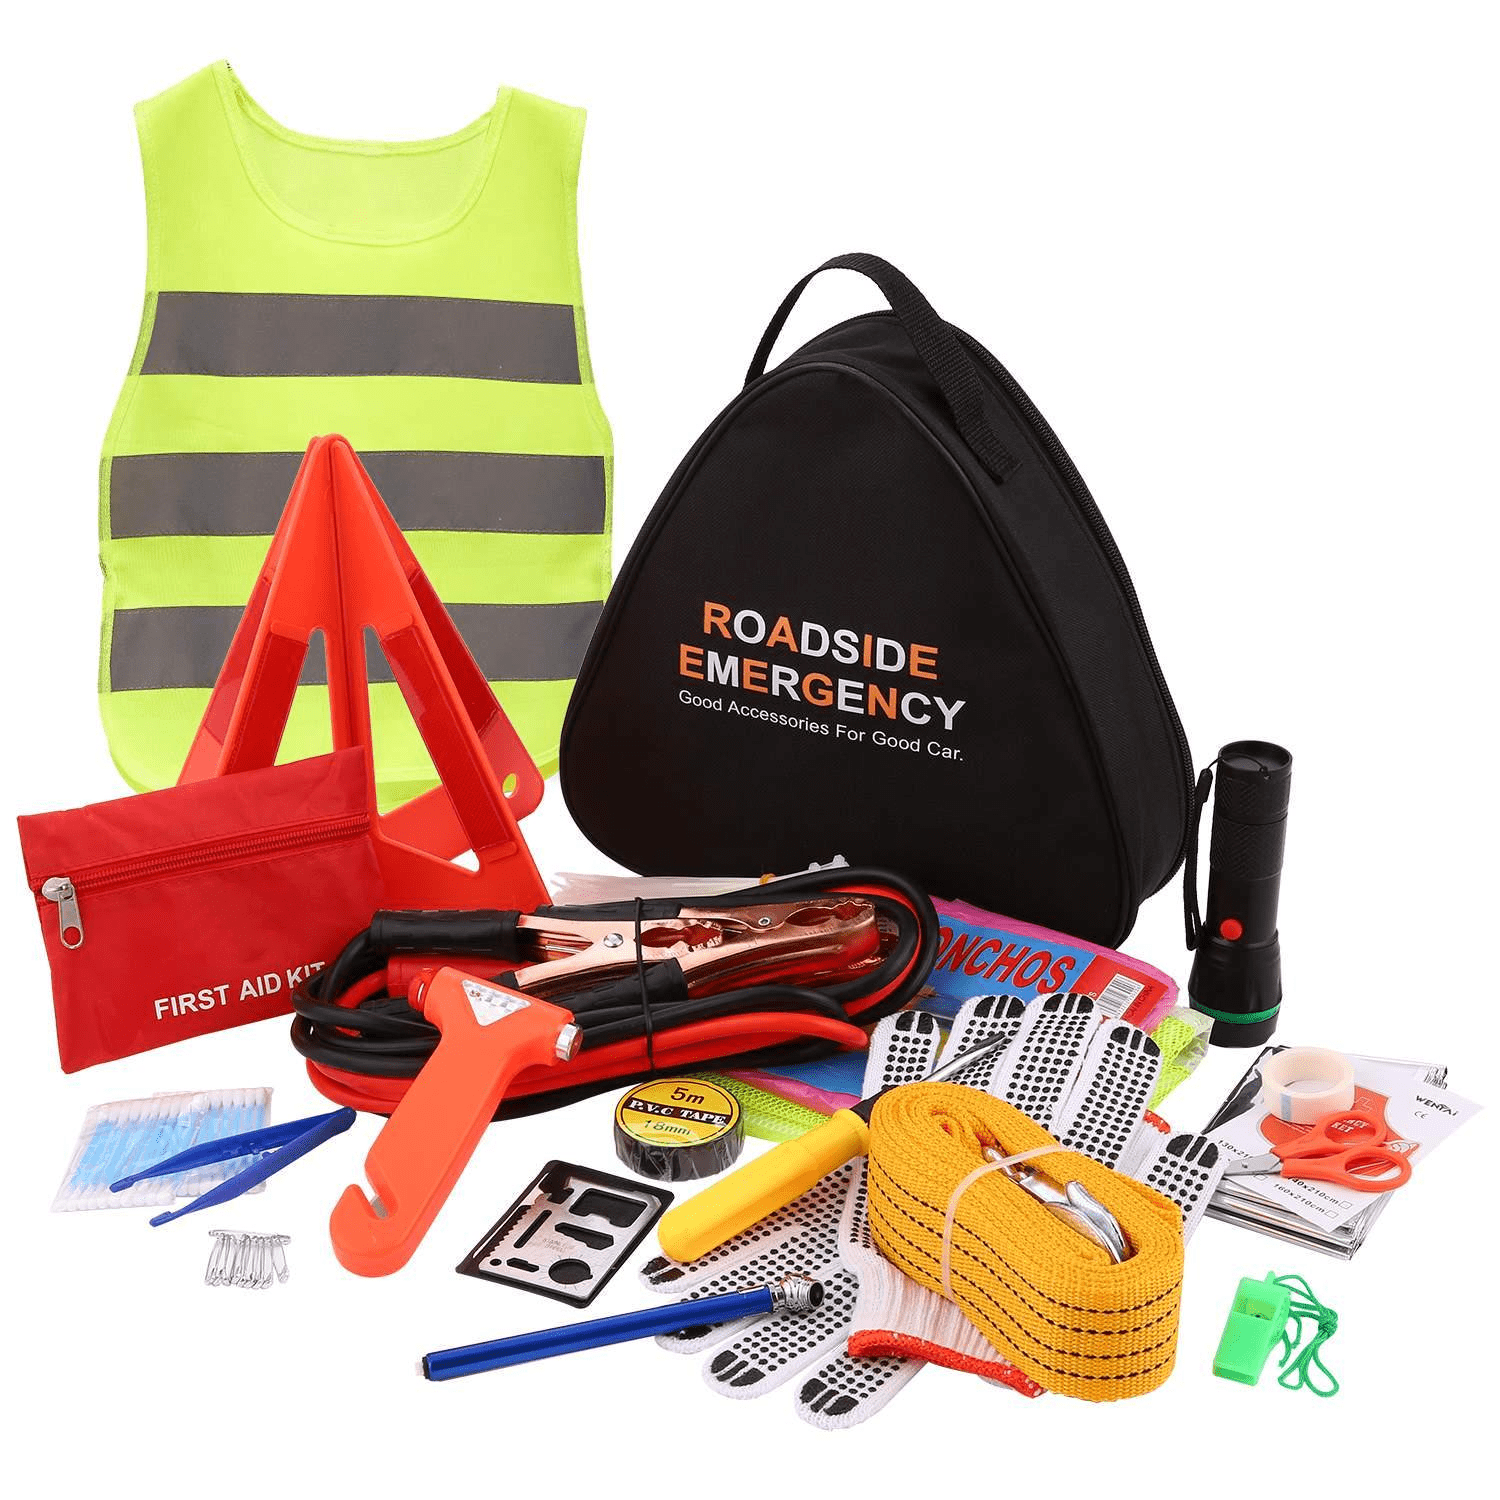 Multifunctional Car Tool Kits Emergency First aid kit Triangle Bag - Contains Jumper Cables, Tools, Reflective Safety Triangle and Safety Ham Car Emergency Kit Roadside Assistance Auto Emergency Kit